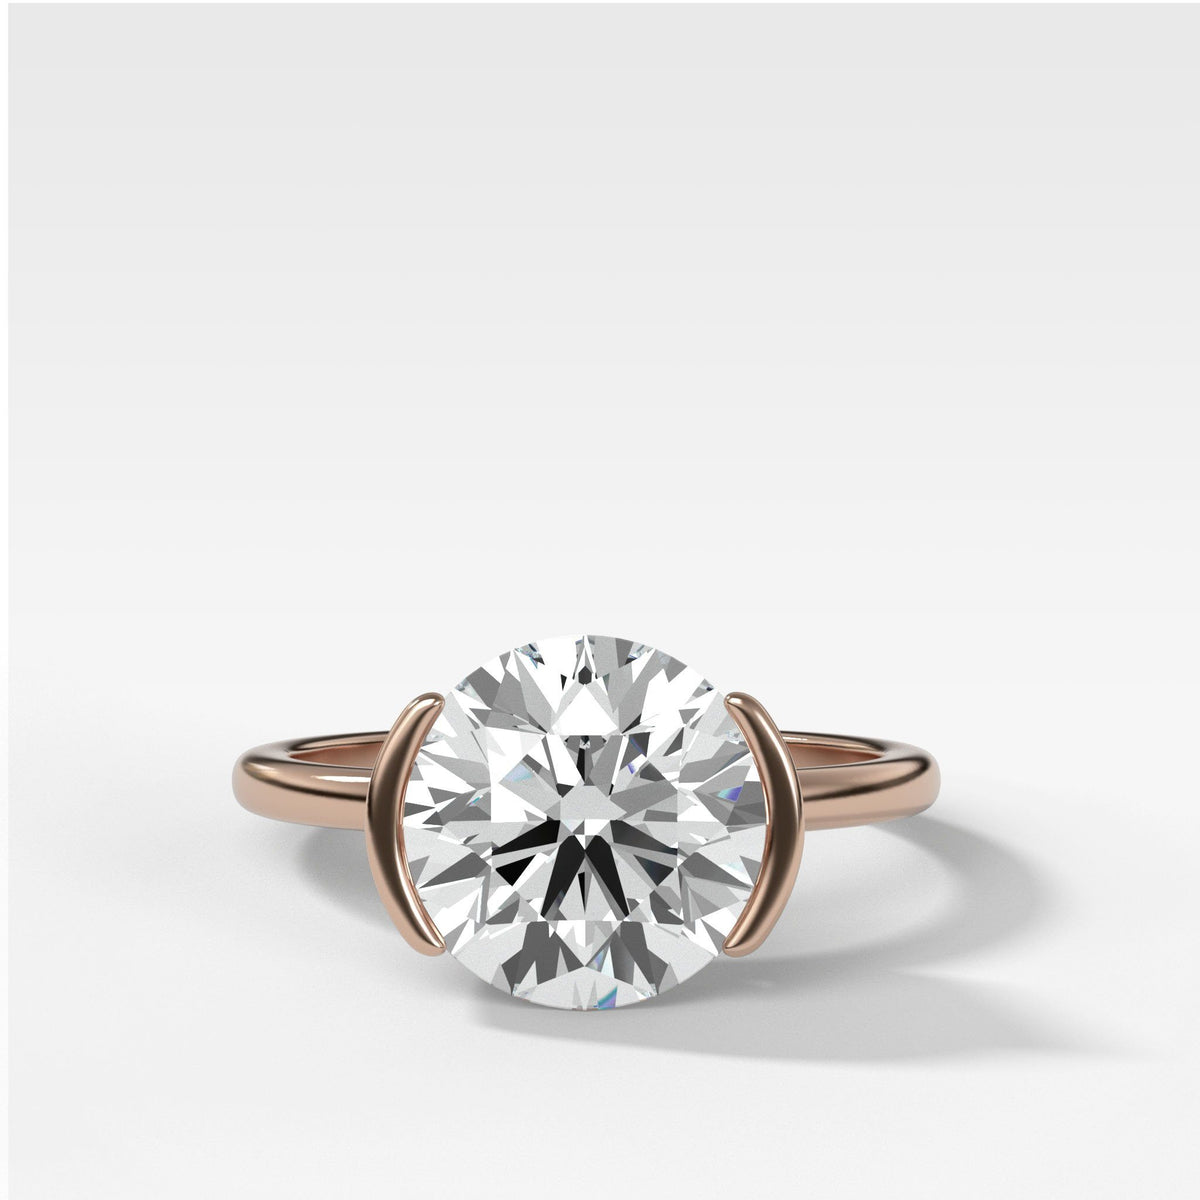 Half Bezel Solitaire Engagement Ring With Round Cut by Good Stone in Rose Gold